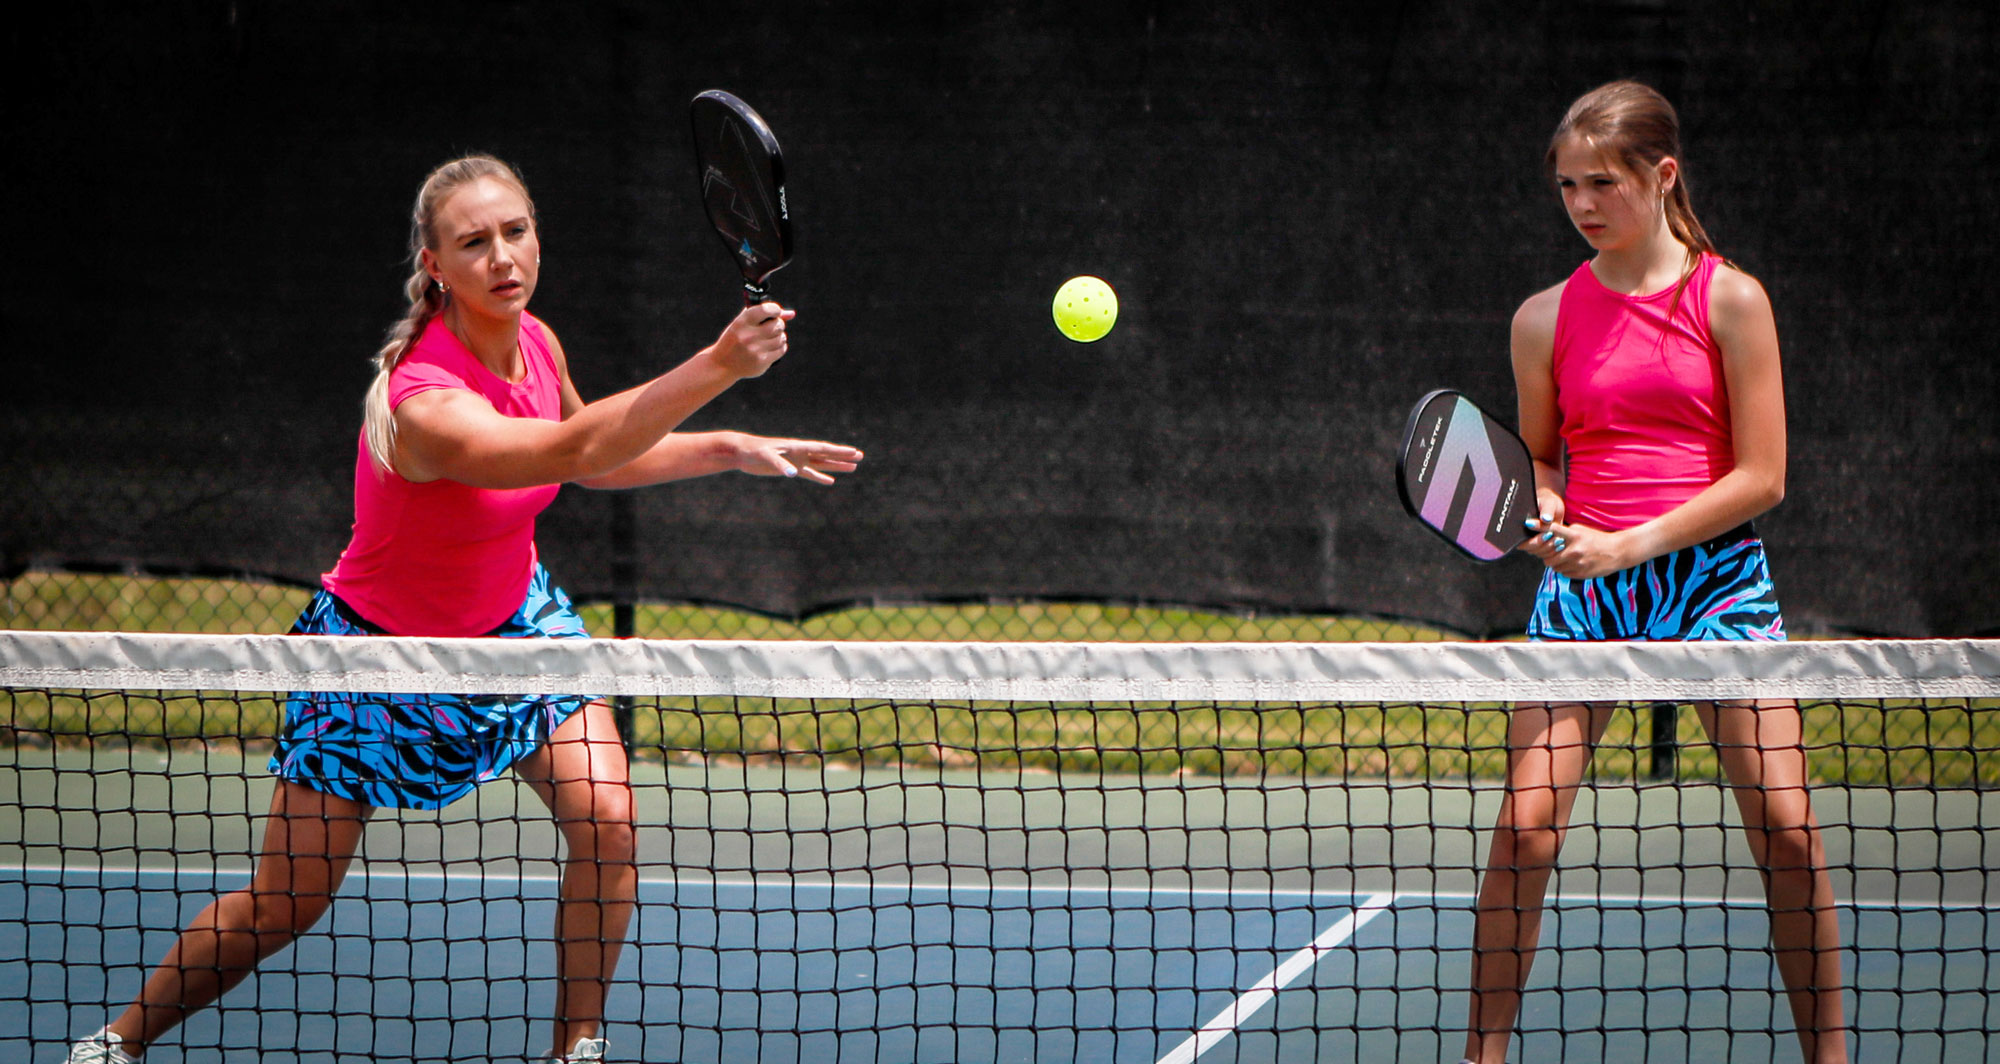 Two women playing pickleball wearing Faye + Florie outfits.